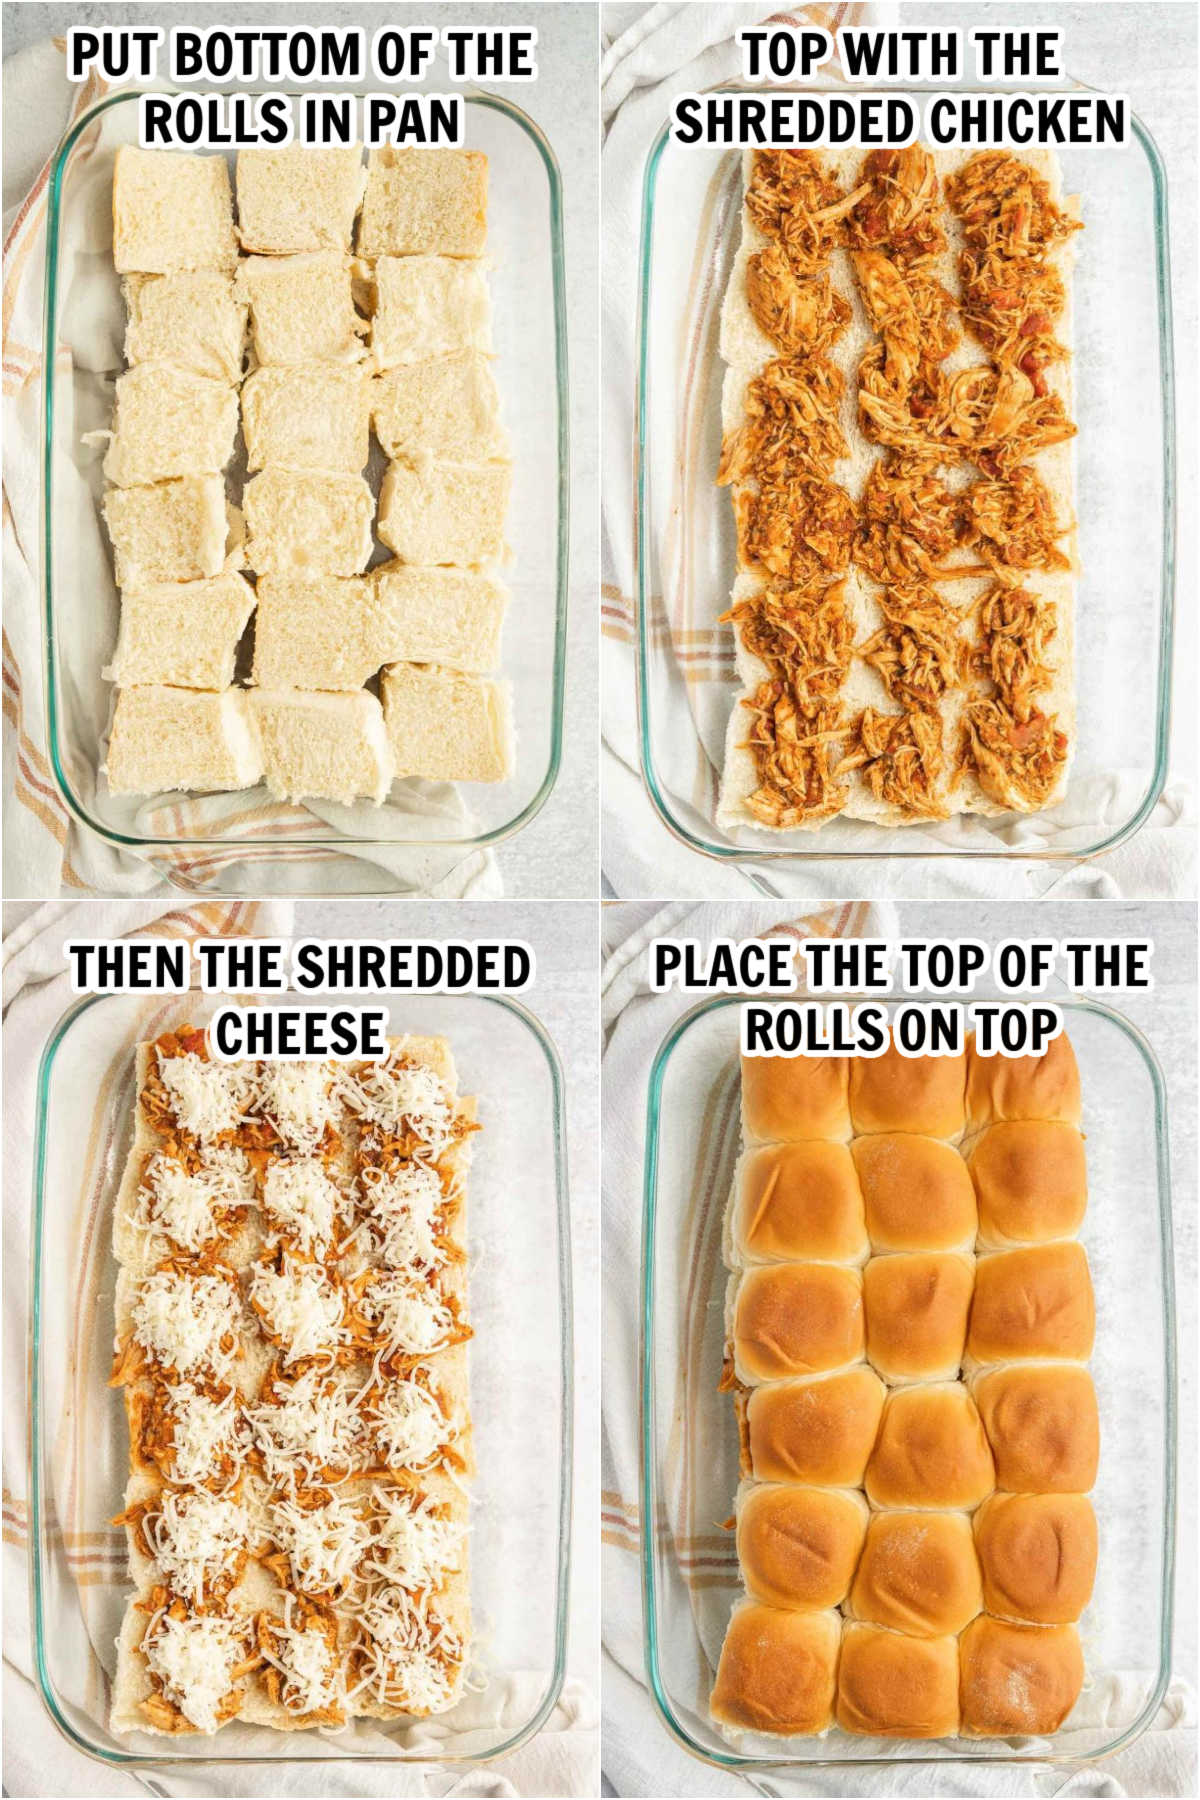 The process of making chicken parmesan sliders